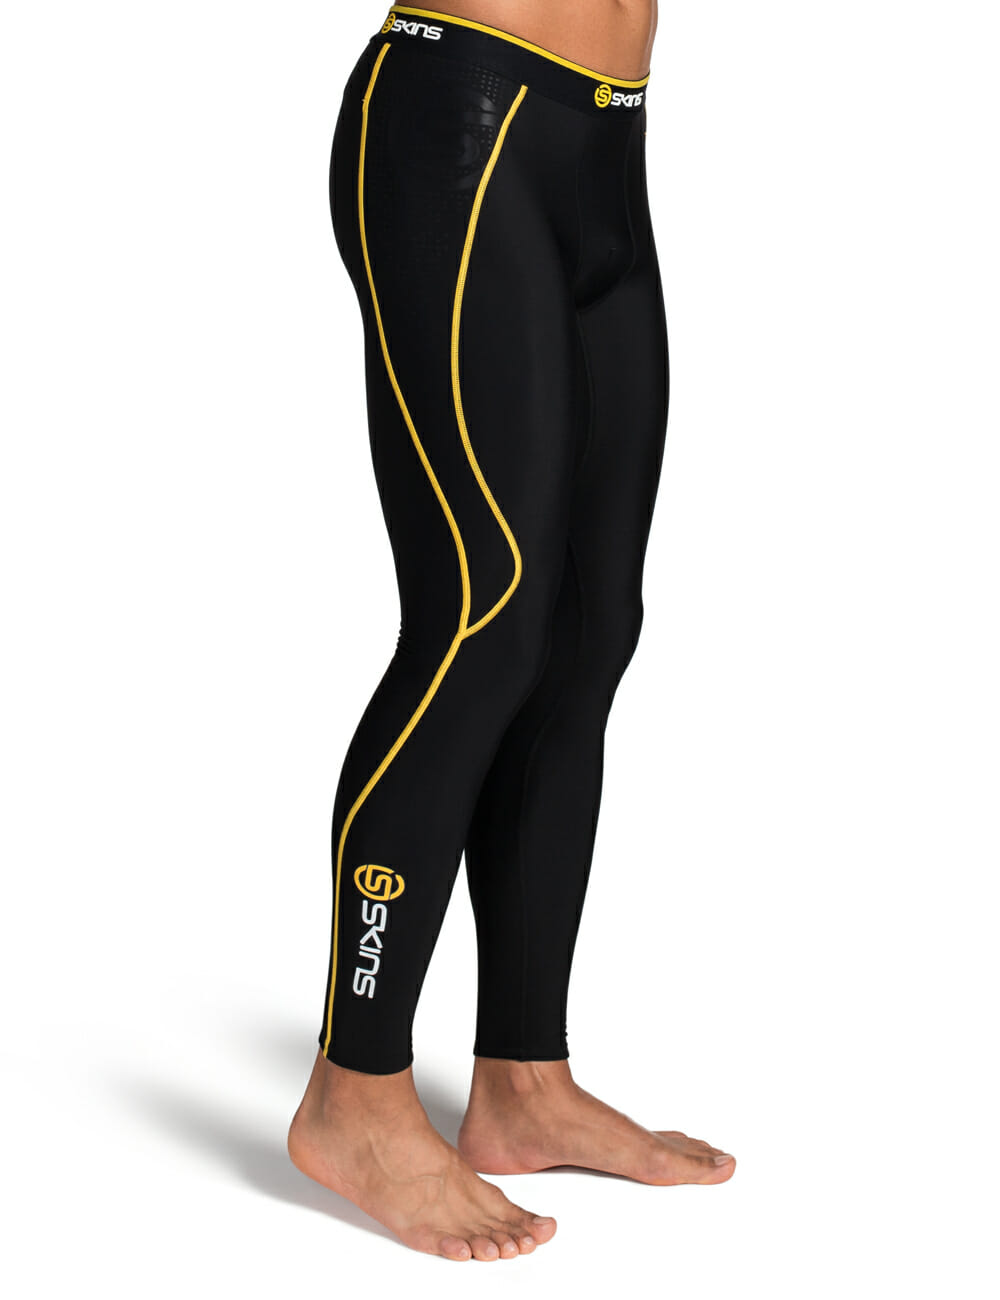 SKINS Men's A200 Thermal Long Tights Black/Yellow - SKINS Compression UK